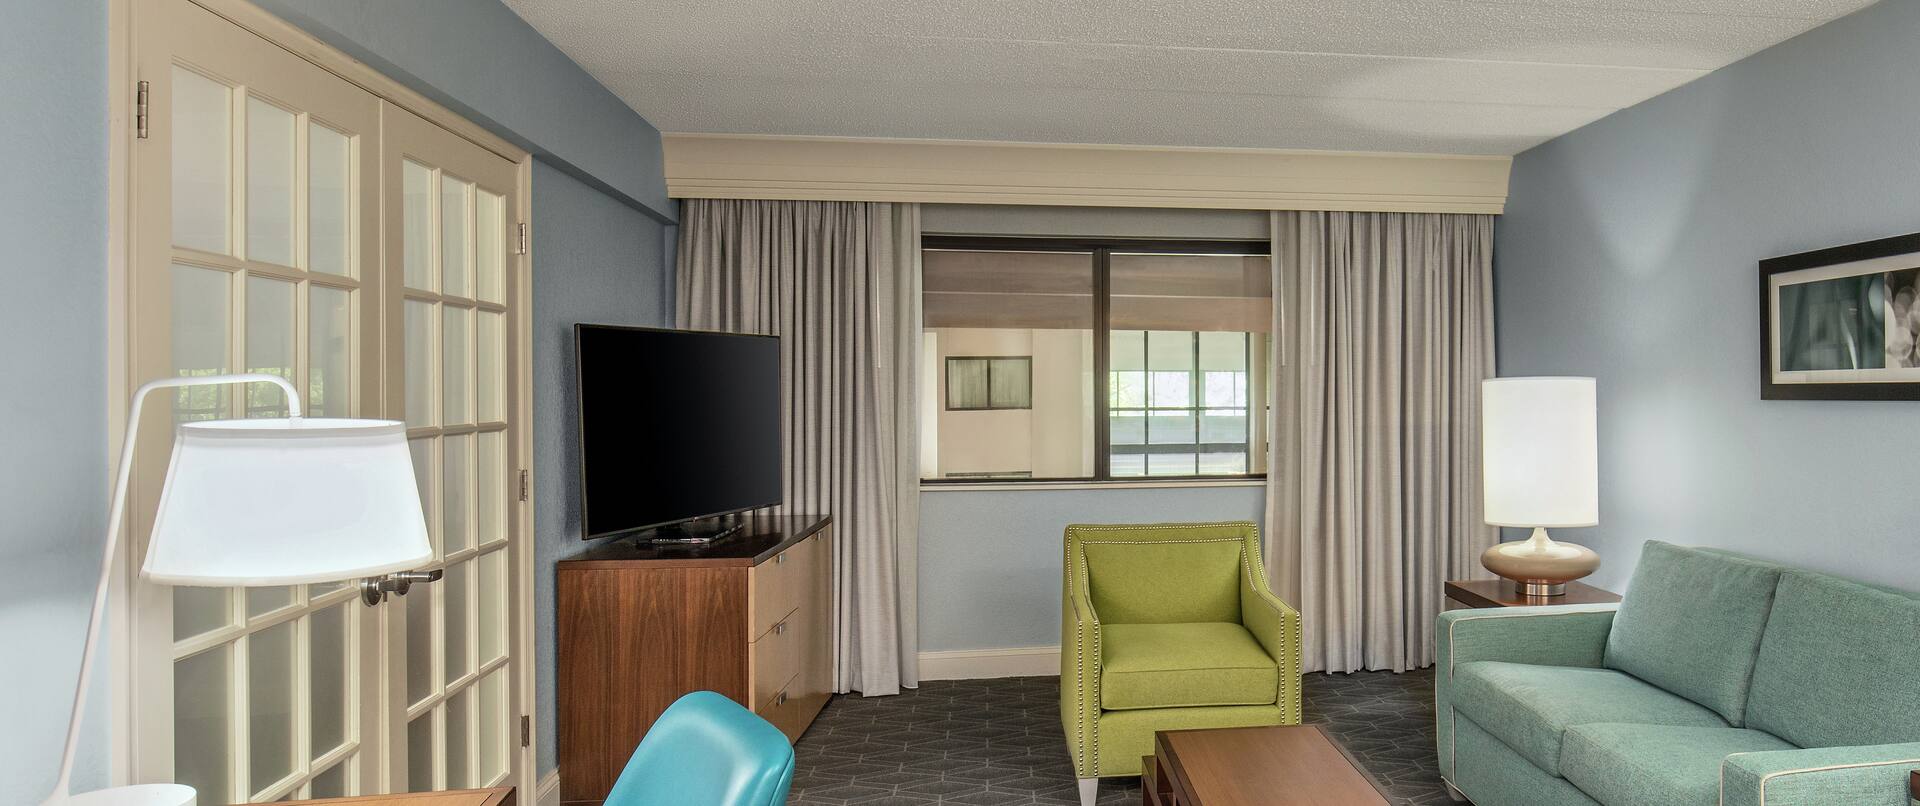 Relax on the Plush Couches within our Large Upscale Suites